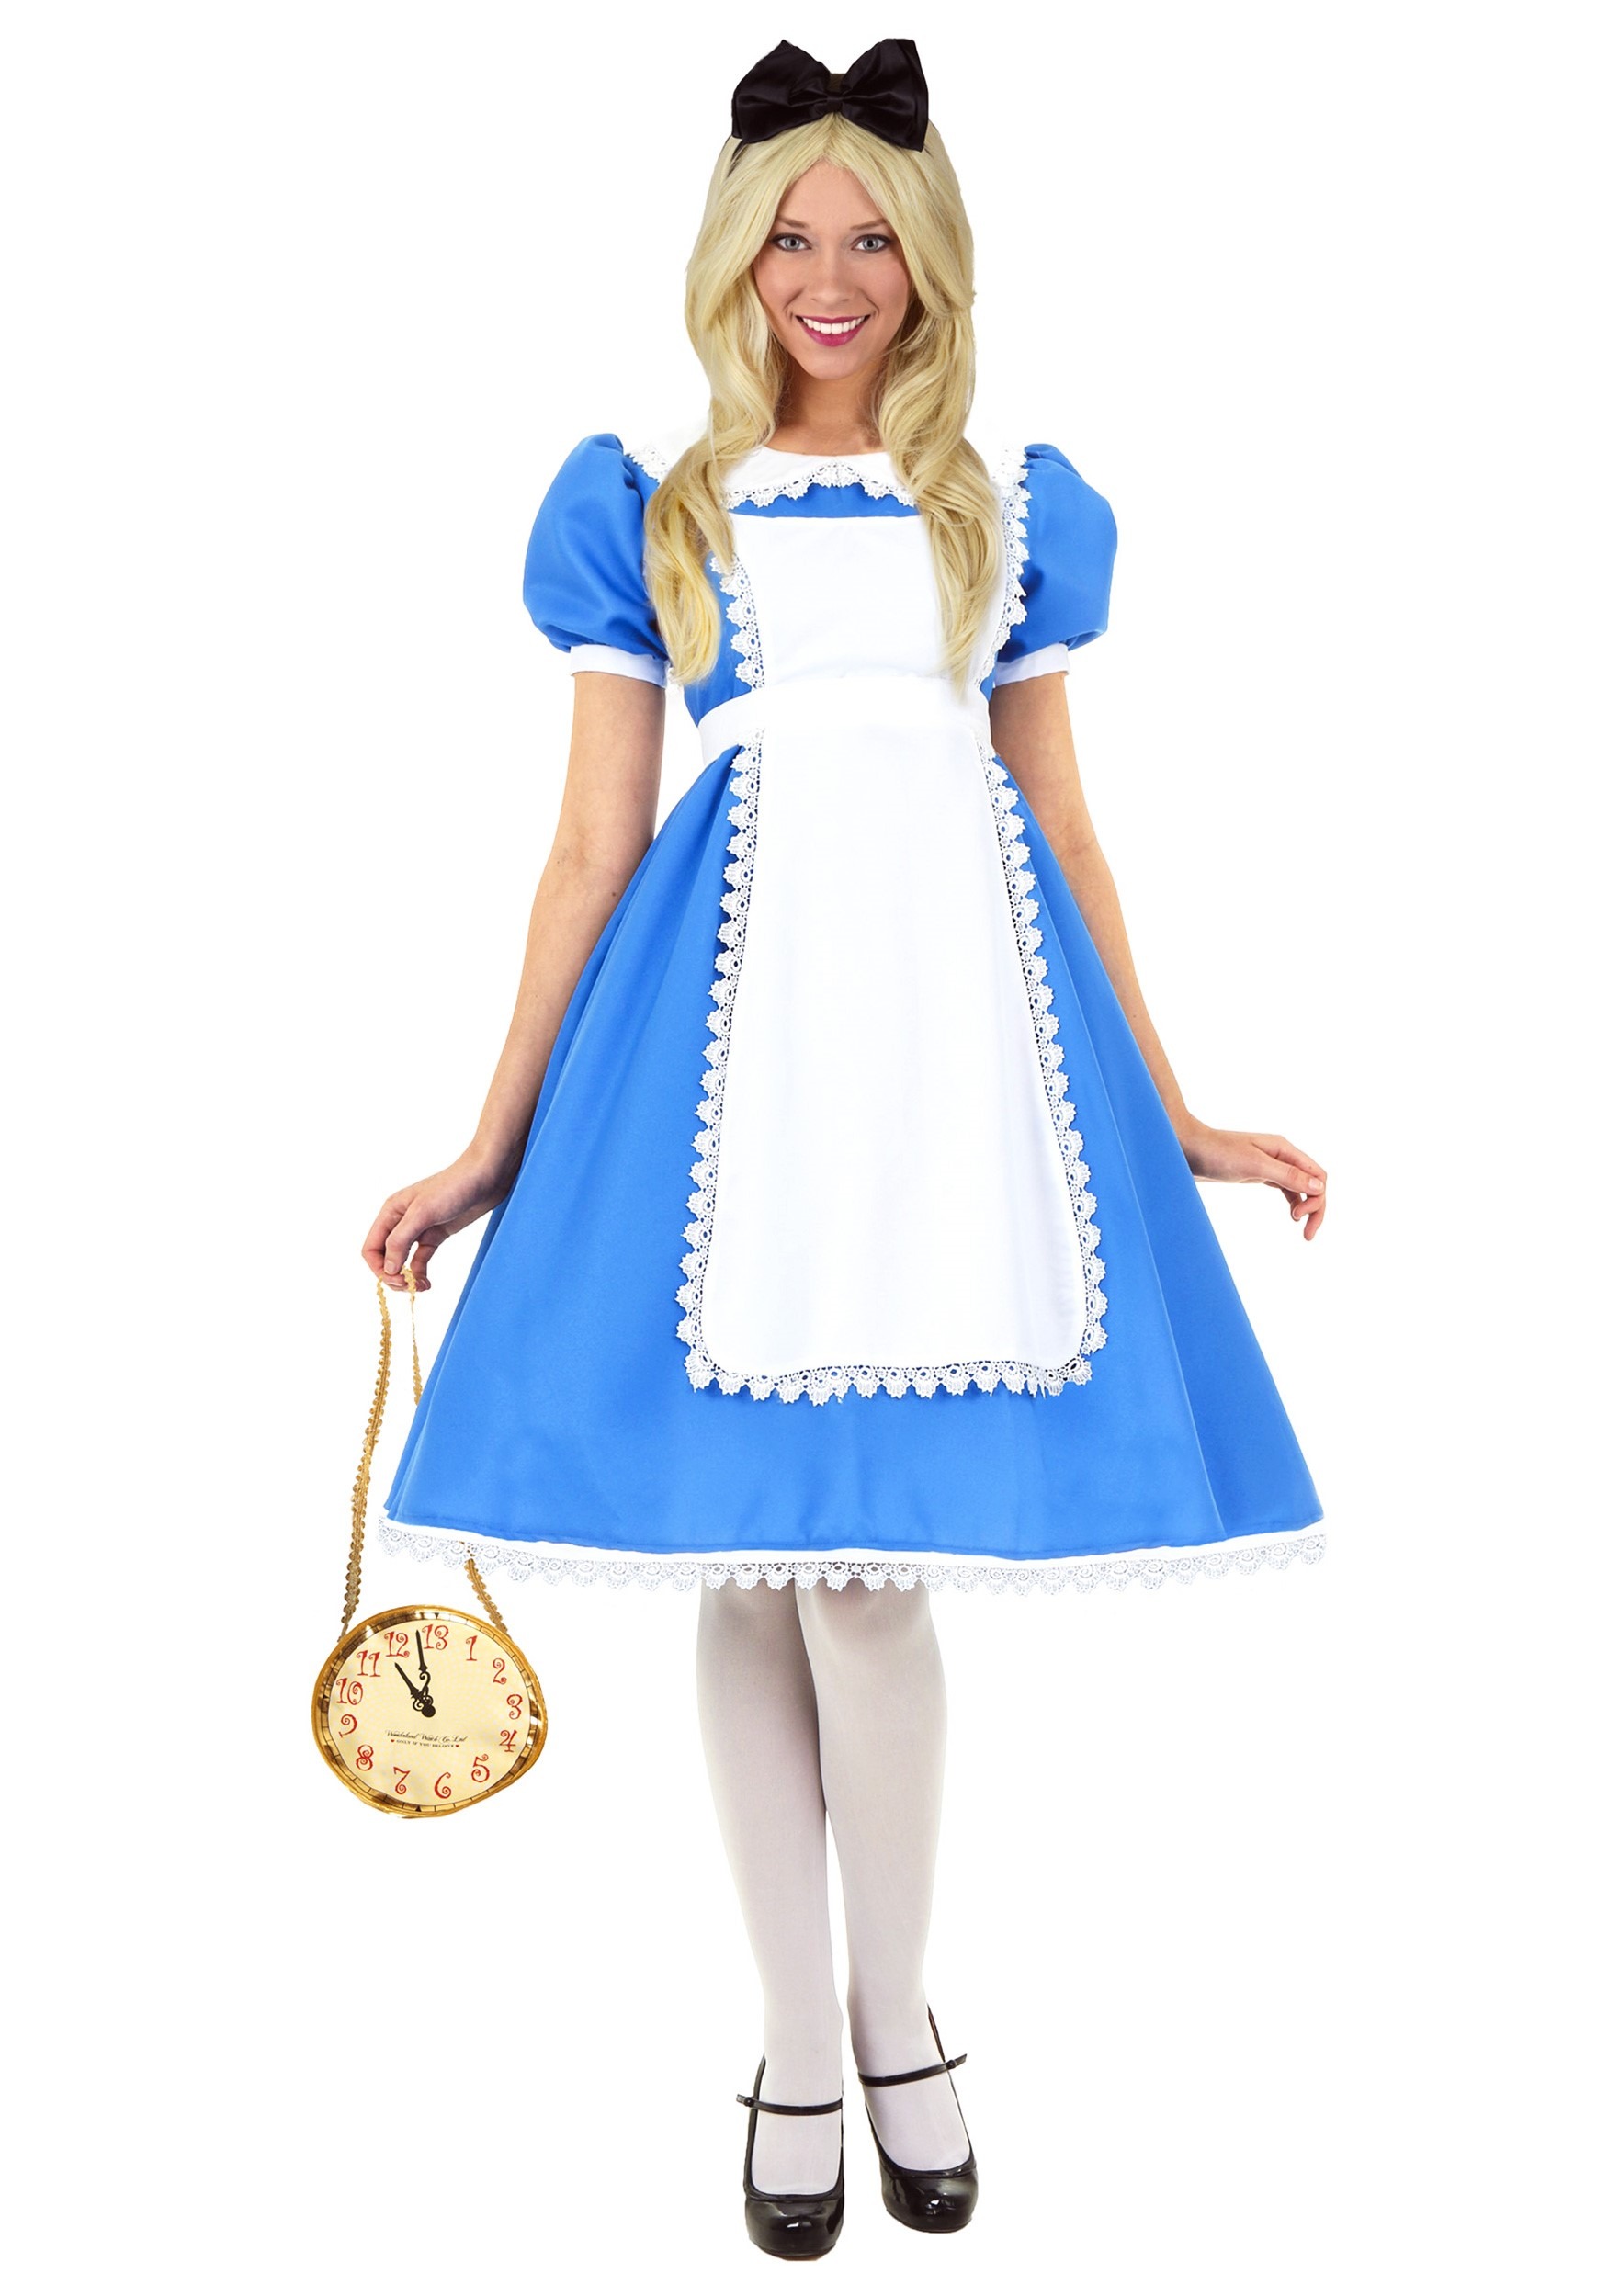 https://images.halloweencostumes.com/products/34029/1-1/adult-supreme-alice-costume-update-main.jpg